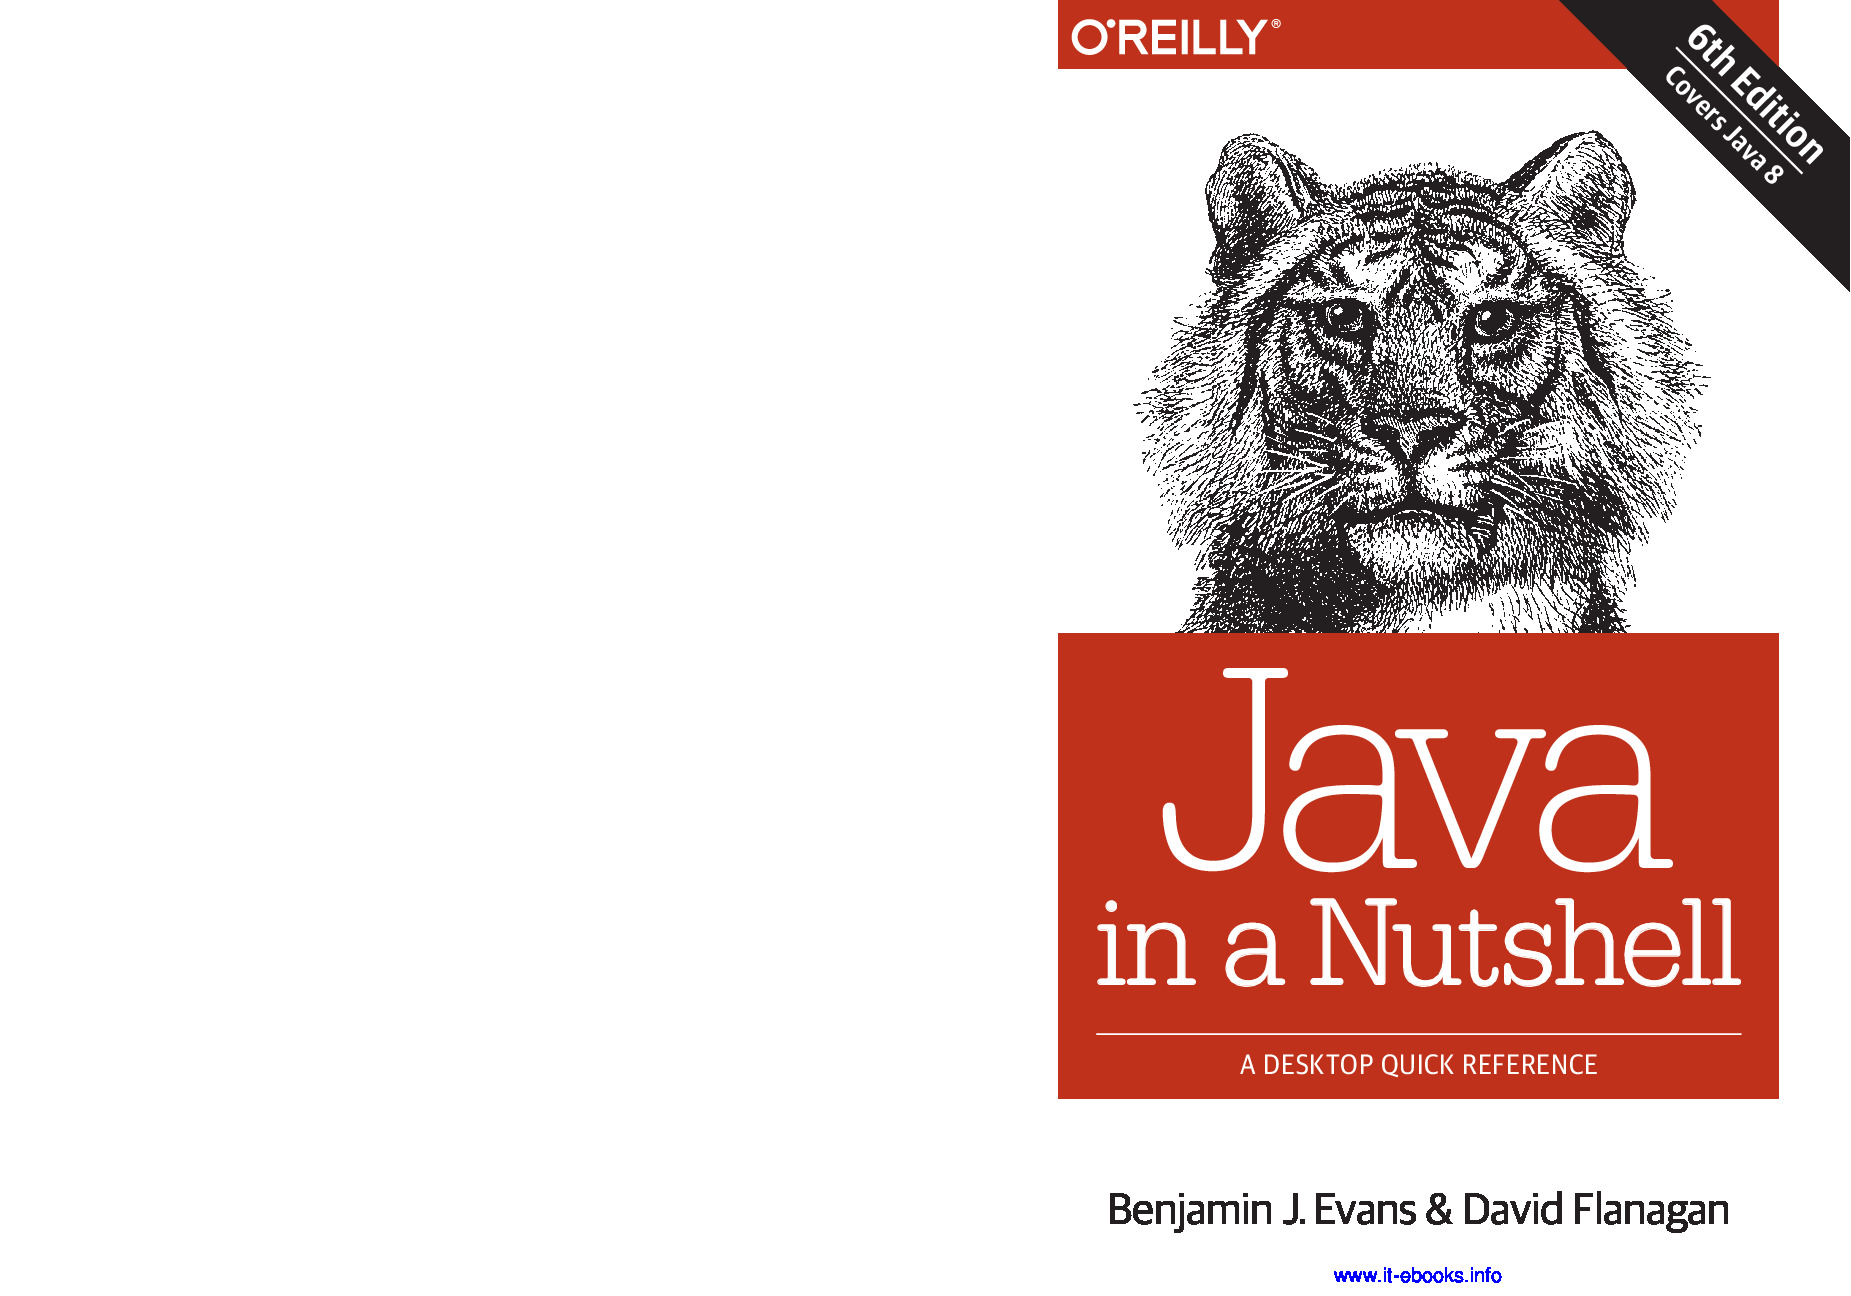 [JAVA][Java in a Nutshell, 6th Edition]